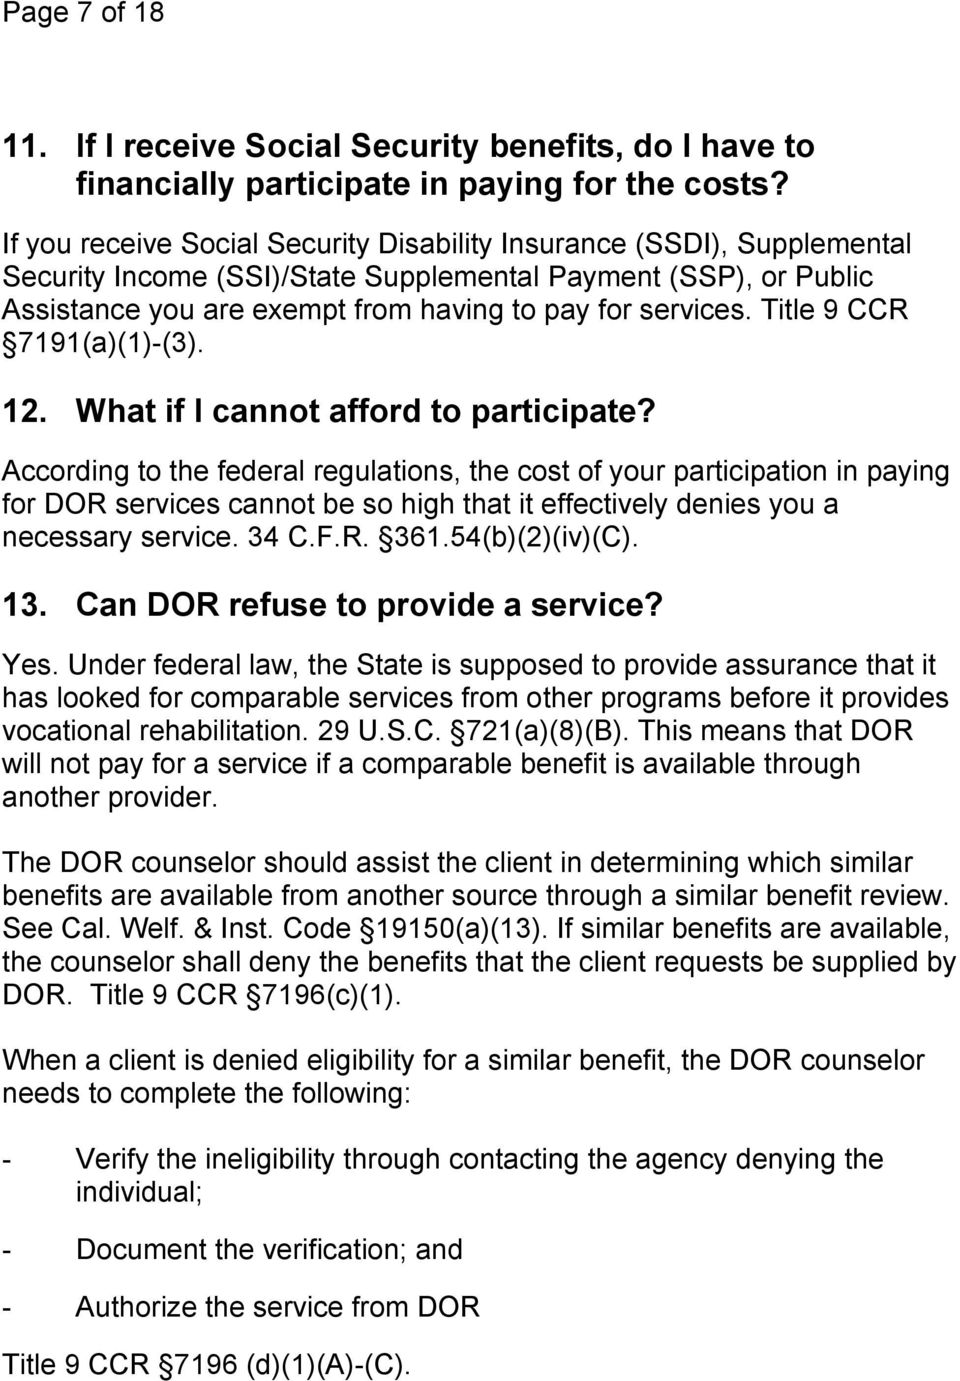 Title 9 CCR 7191(a)(1)-(3). 12. What if I cannot afford to participate?